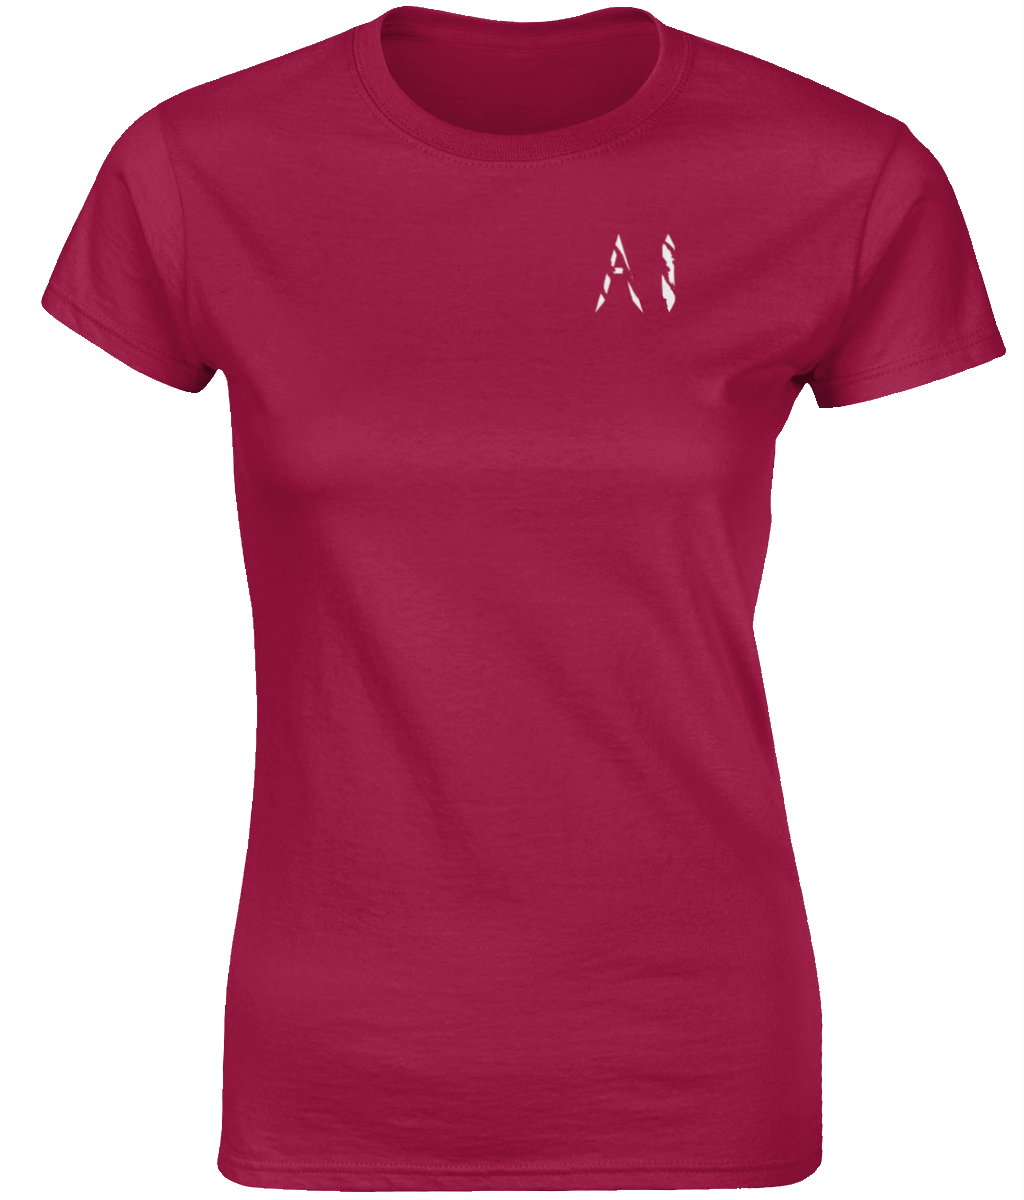 Womens Dark pink Fitted Ringspun T-Shirt with White AI logo on left breast